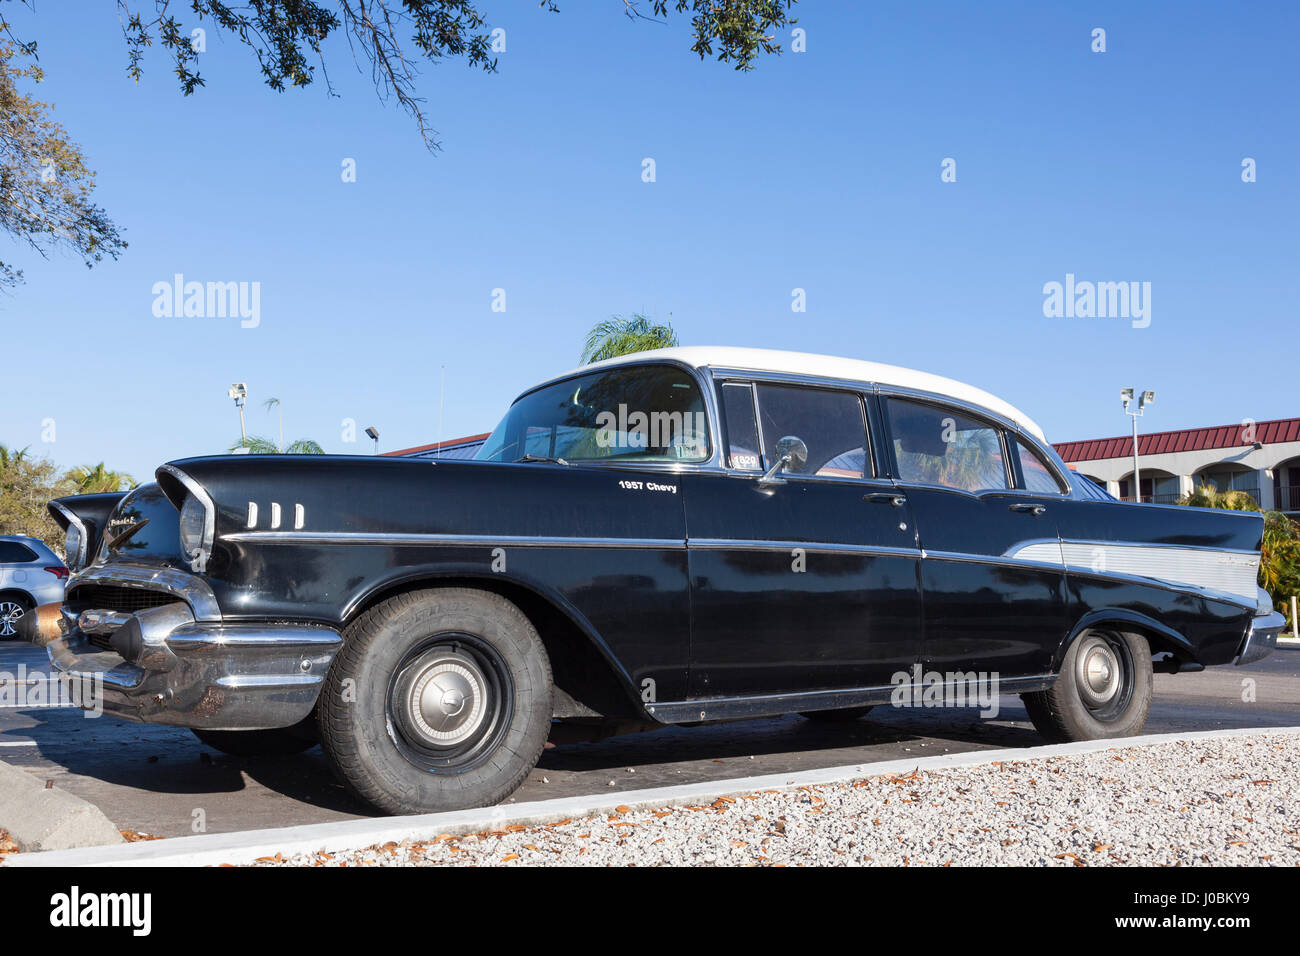 Naples, Fl, USA - March 18, 2017: Black 1957 Chevrolet Belair parked on the street in Naples, Florida, United States Stock Photo